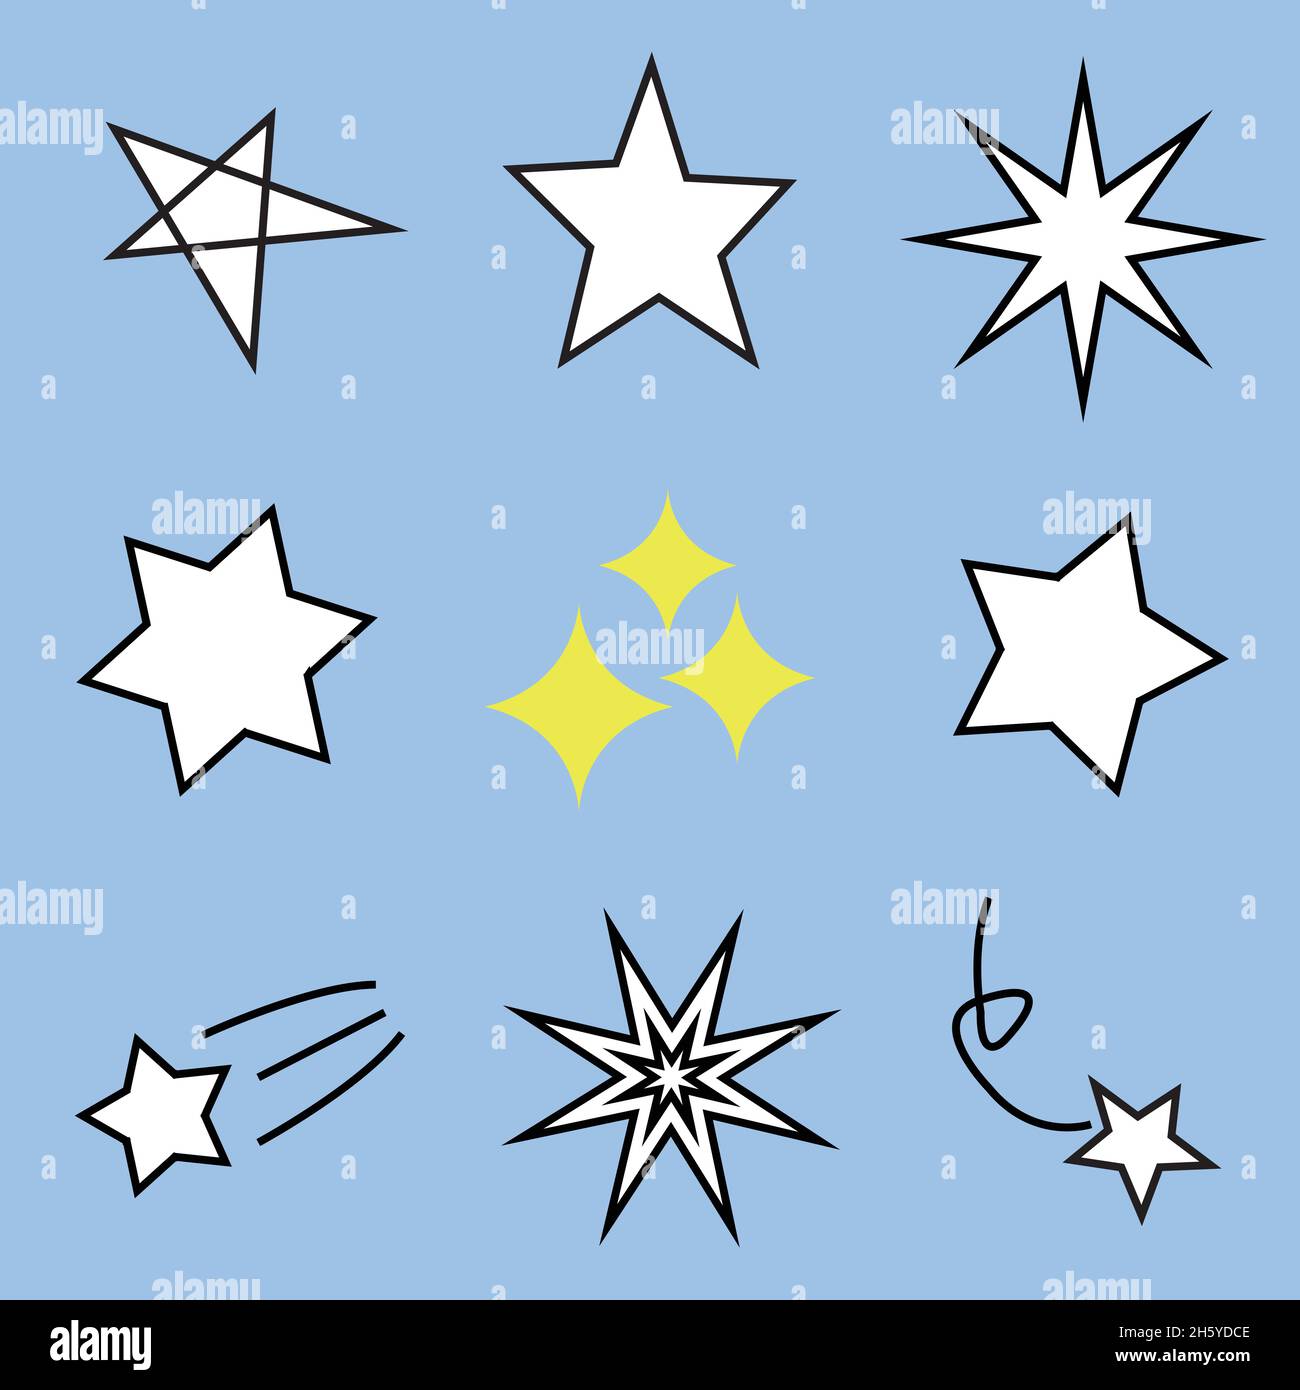 Collection of star icons of various shapes. It can be used as a decoration in various situations. Stock Vector